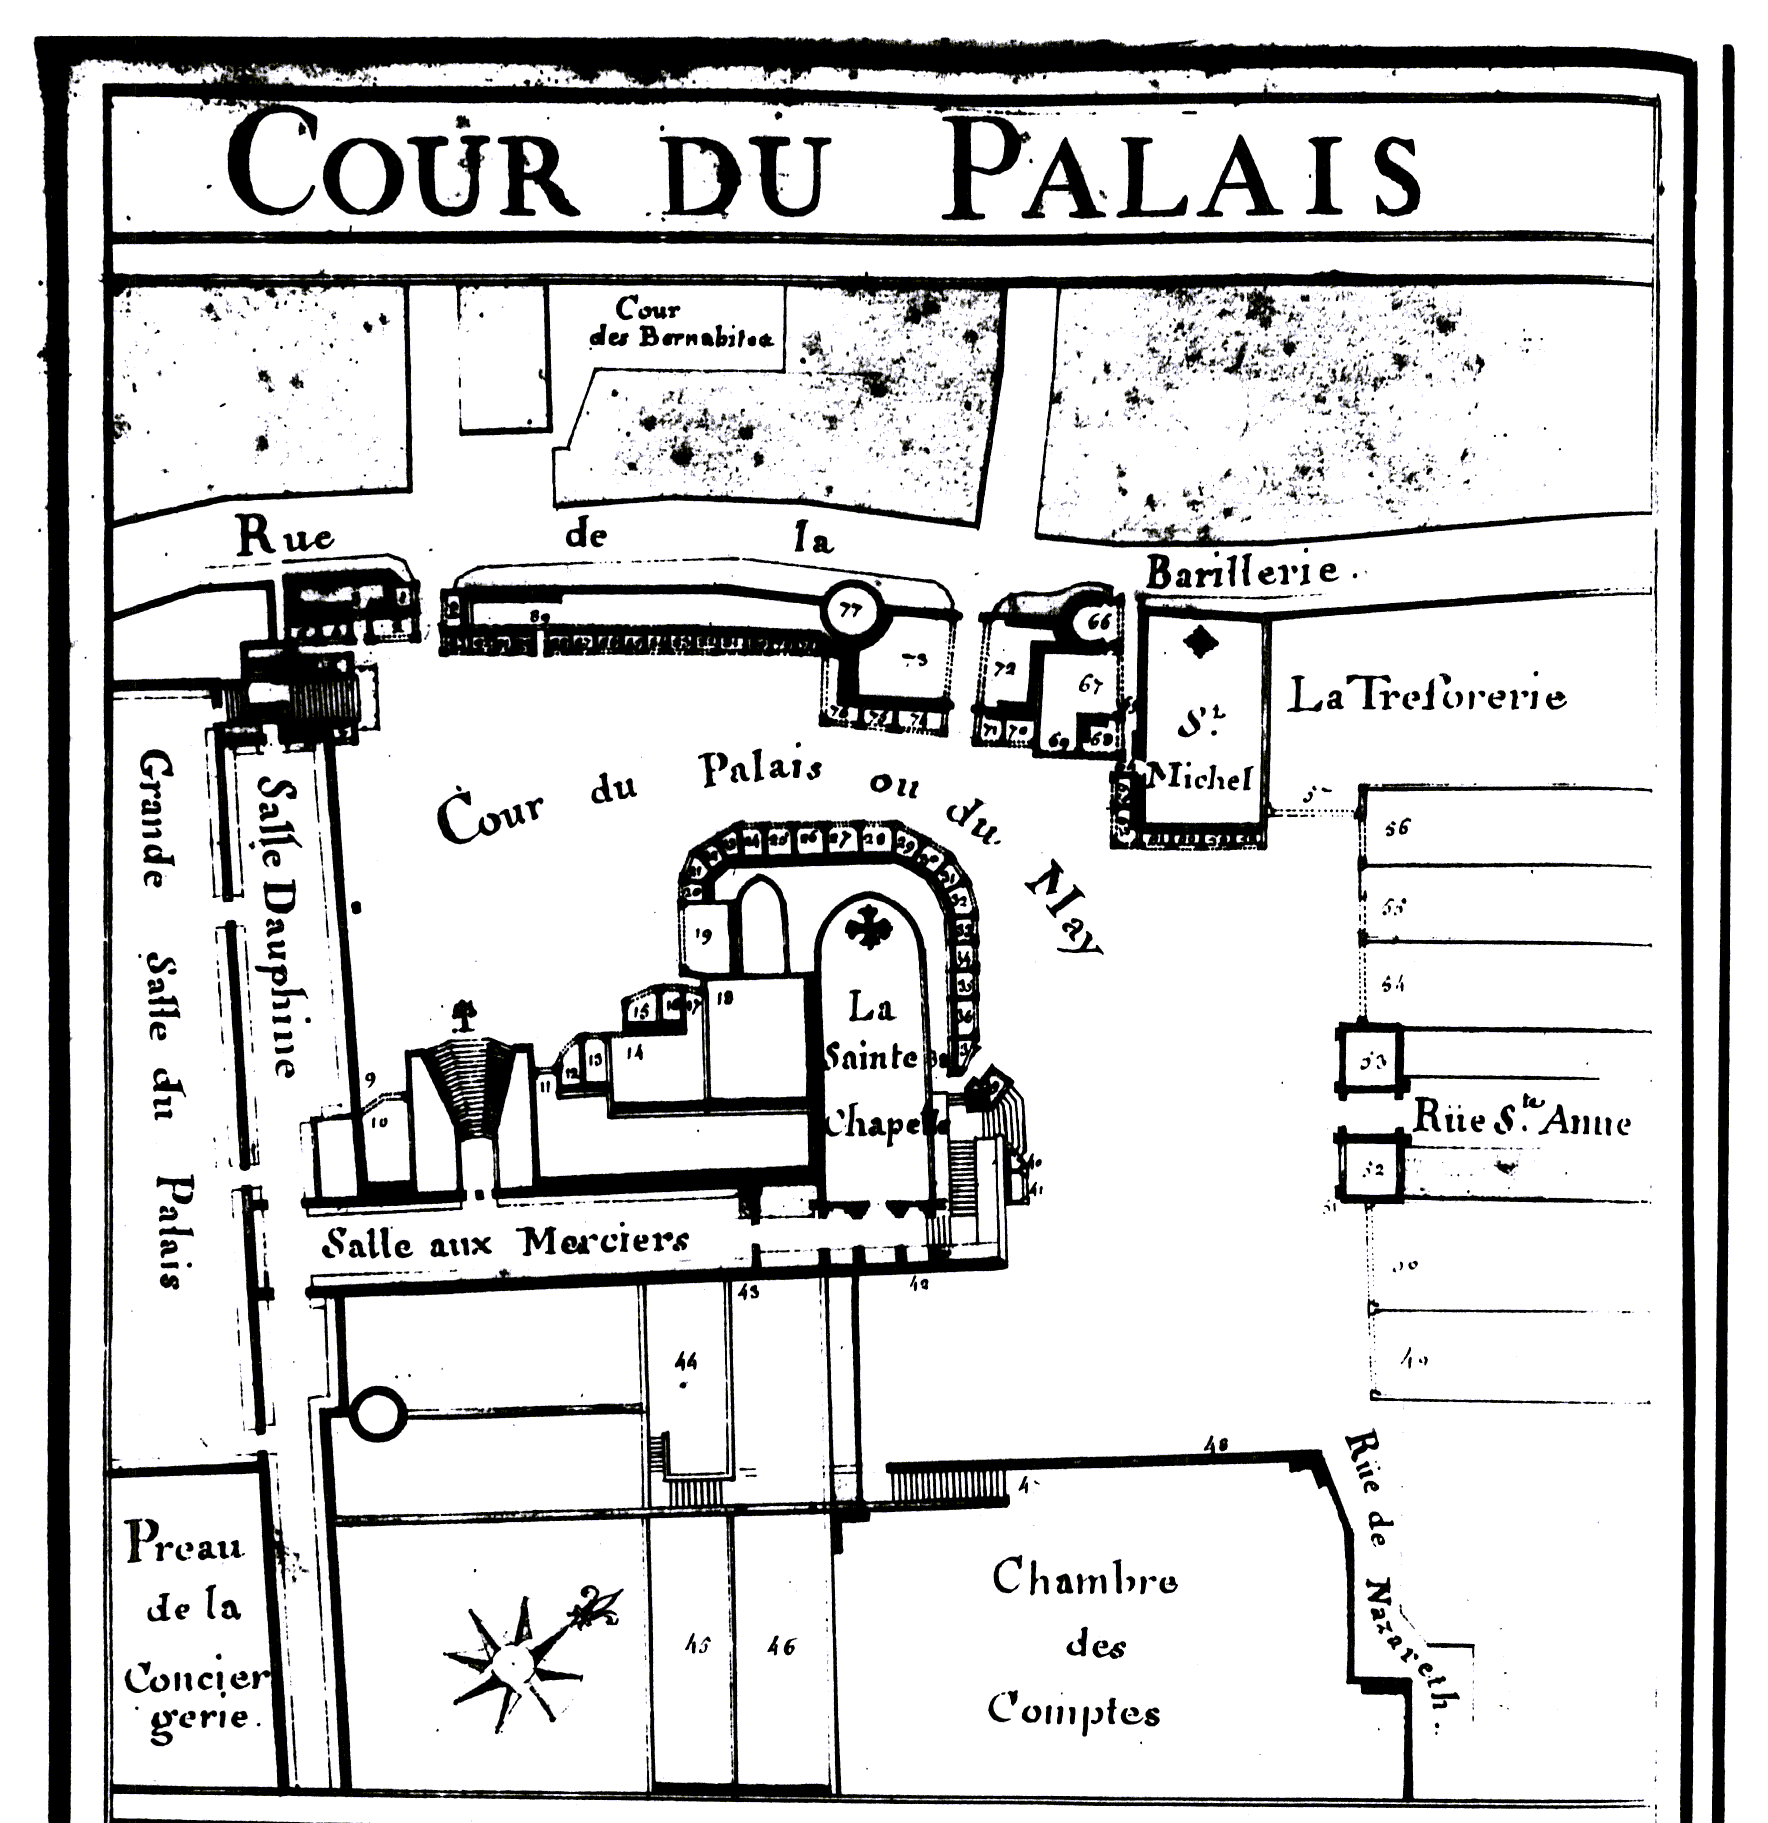 map of the courtyard of the "Palais"